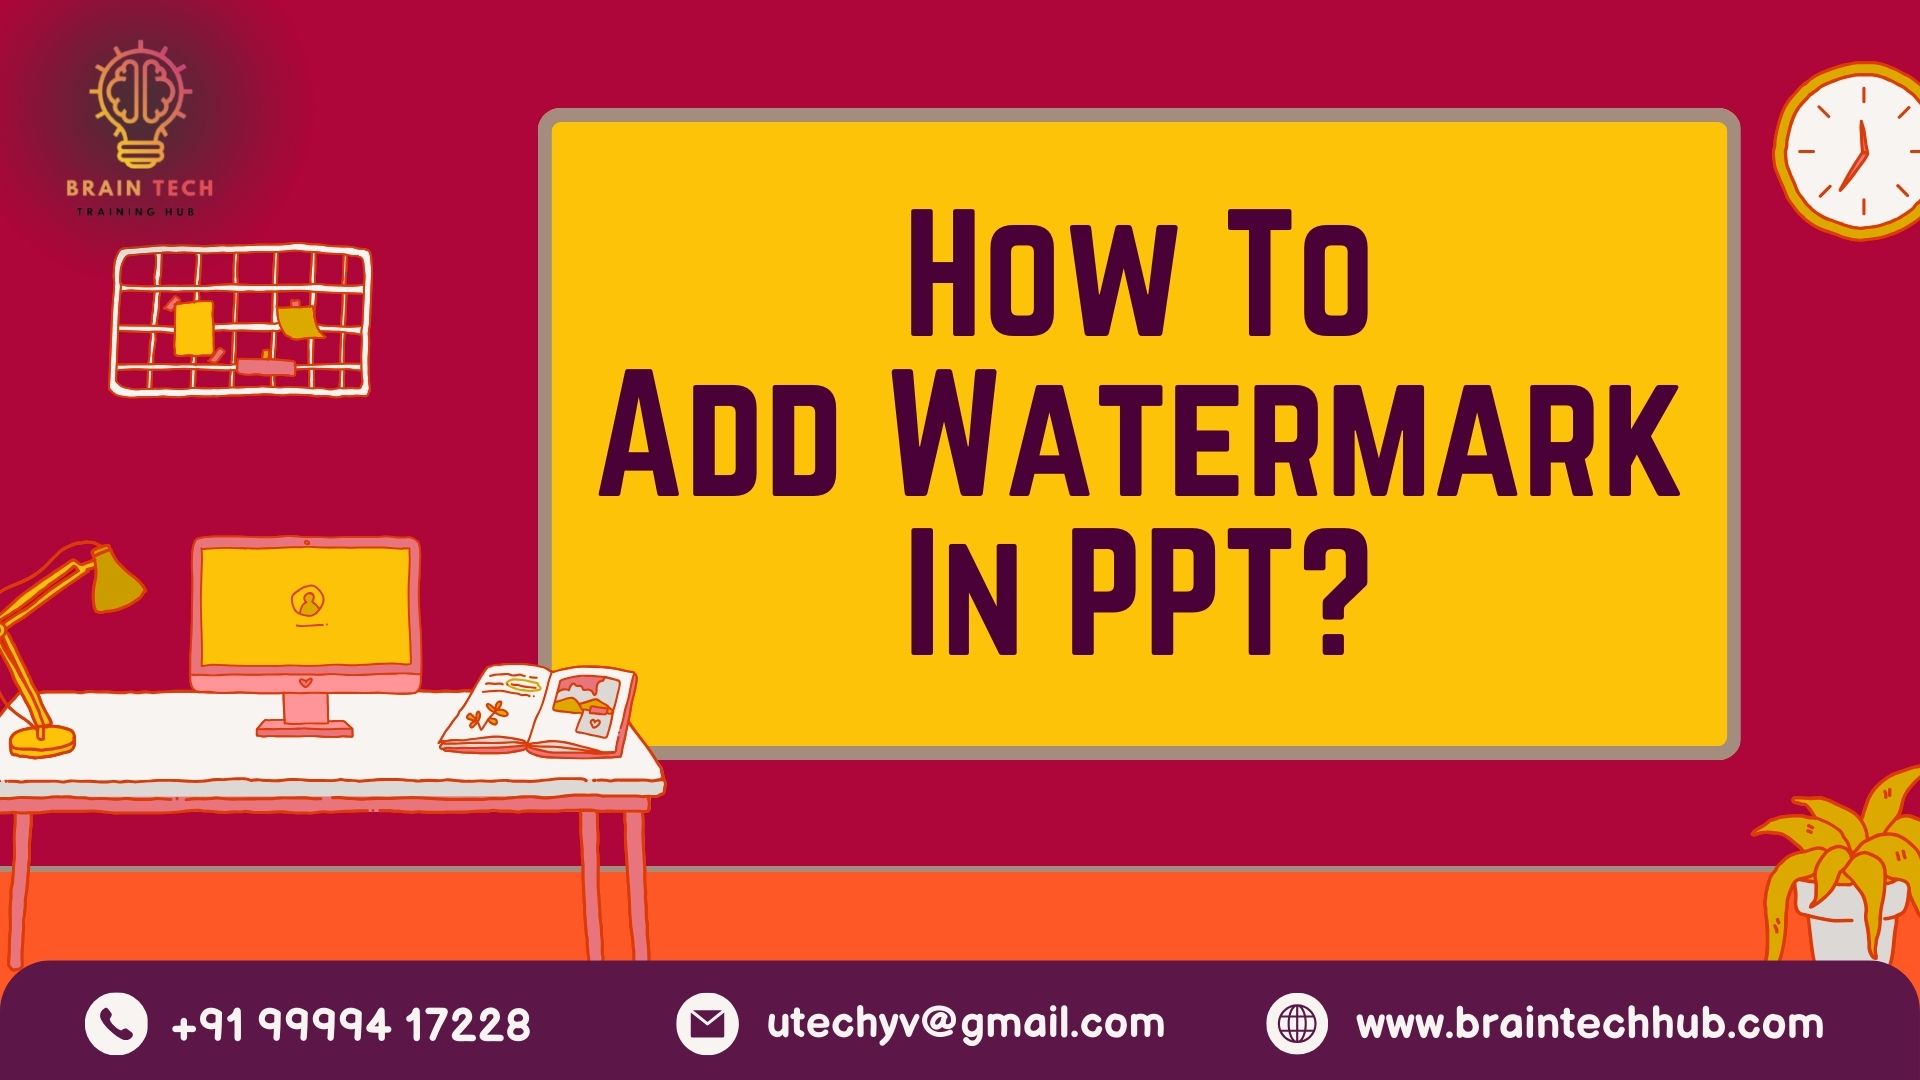 How To Add Watermark In PPT?